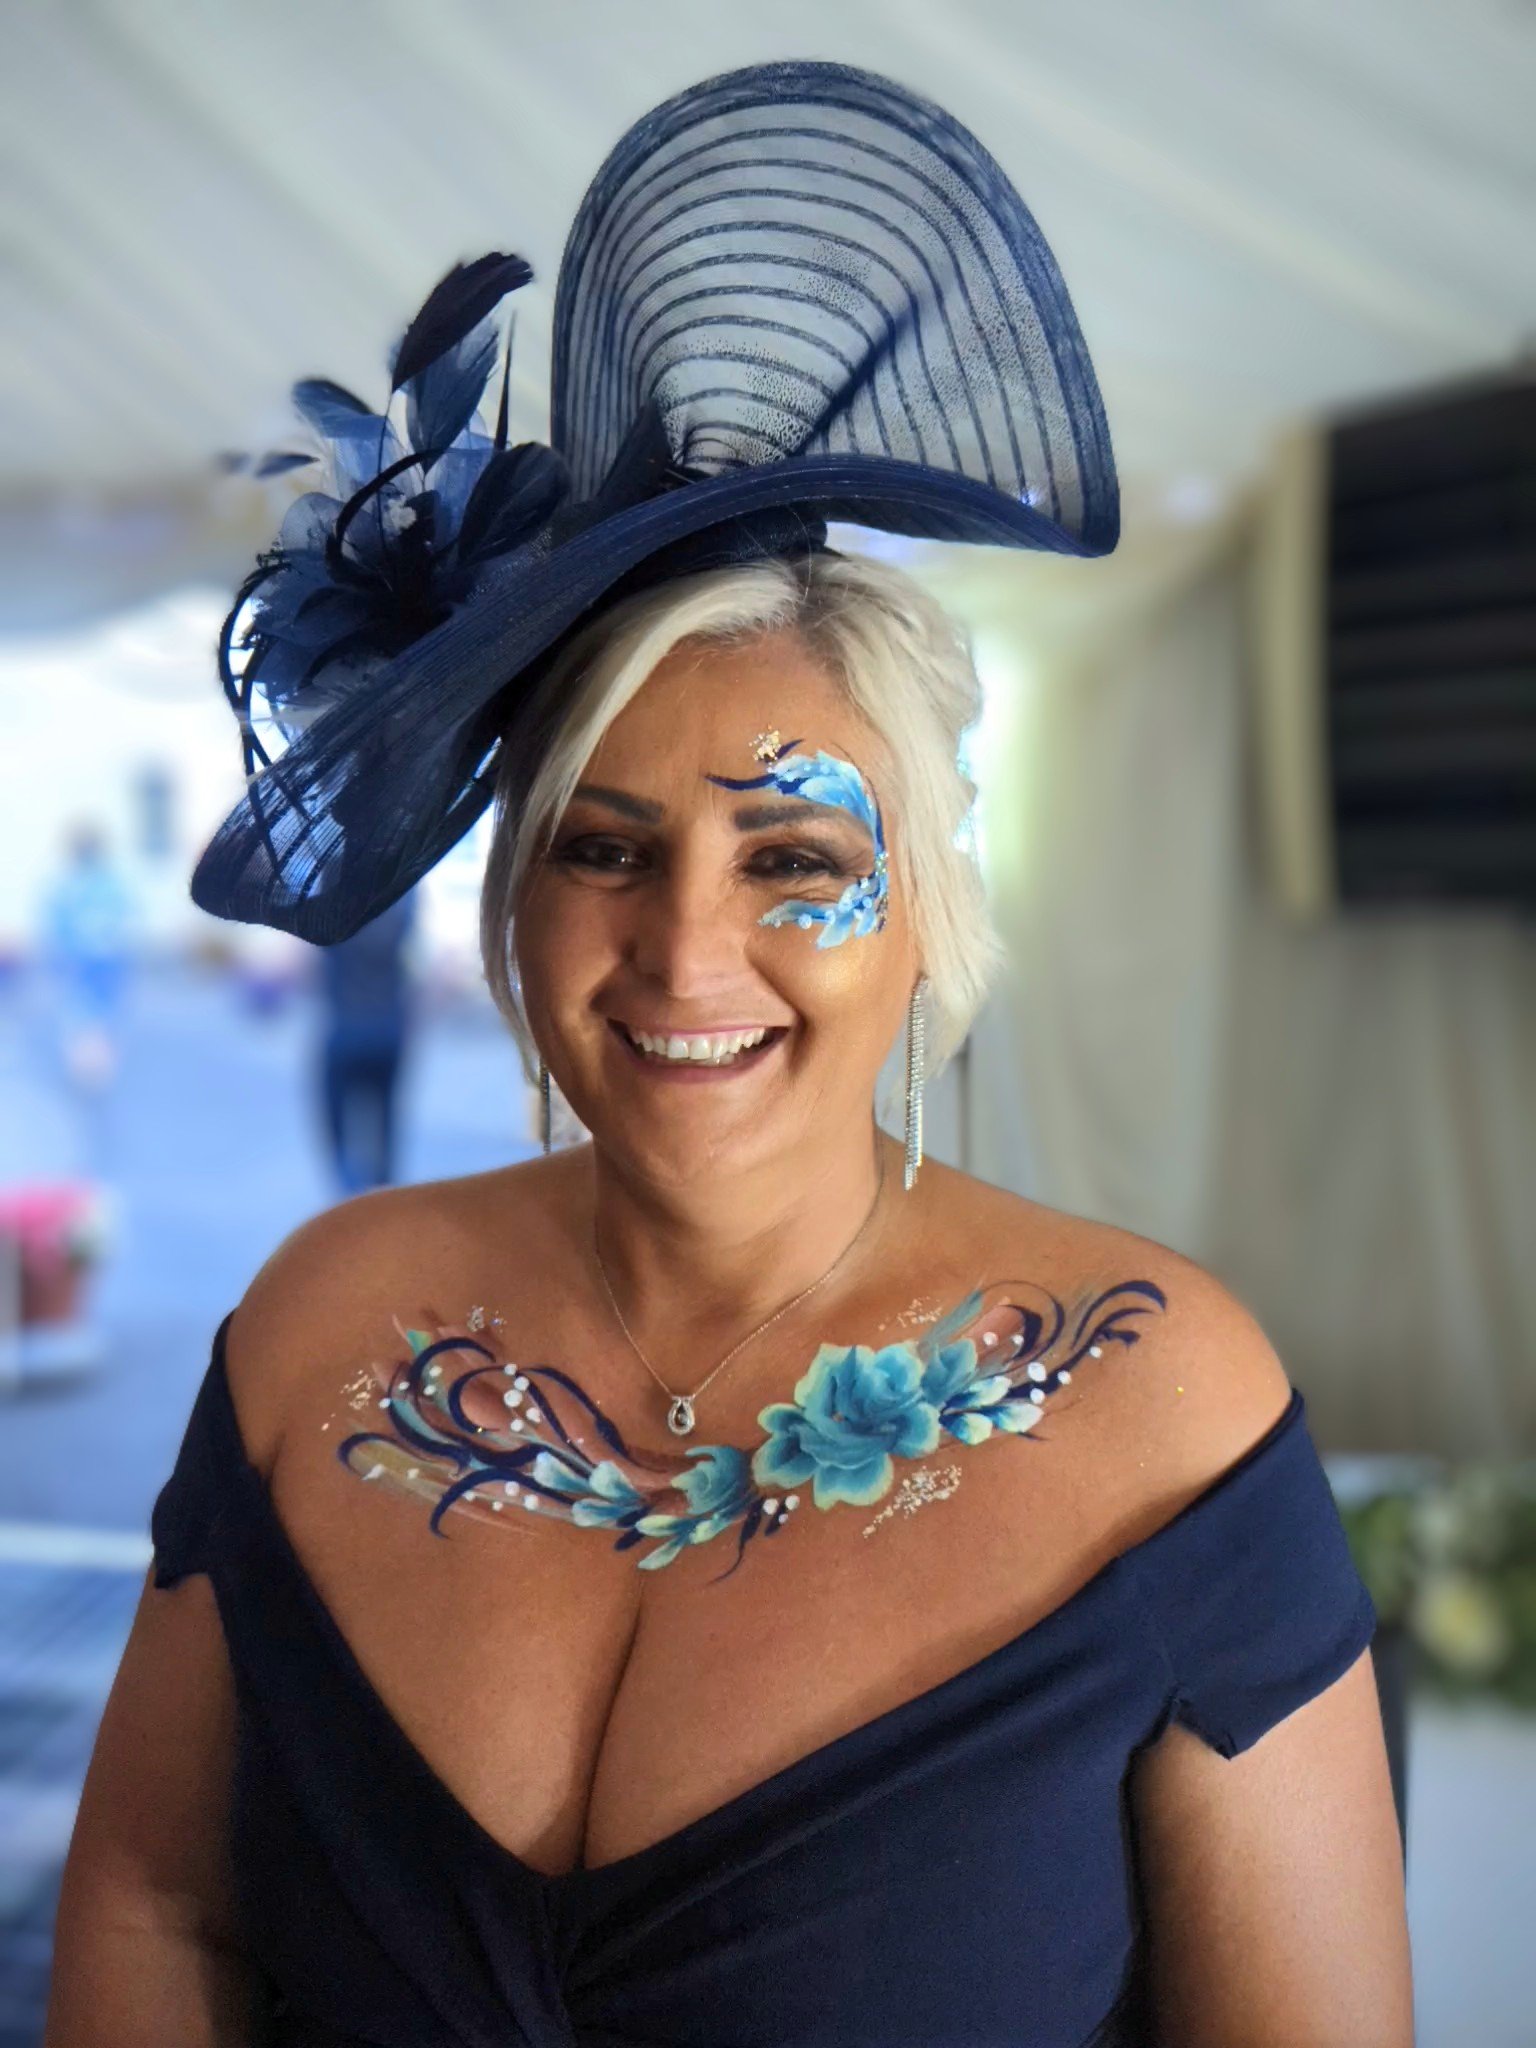  Wedding guest is wearing a navy off the shoulder dress with navy fascinator. Gorgeous blue swirl facepaint is around the eye area with glitter and further hand painted florals that compliment the wedding guests outfit across her chest.  